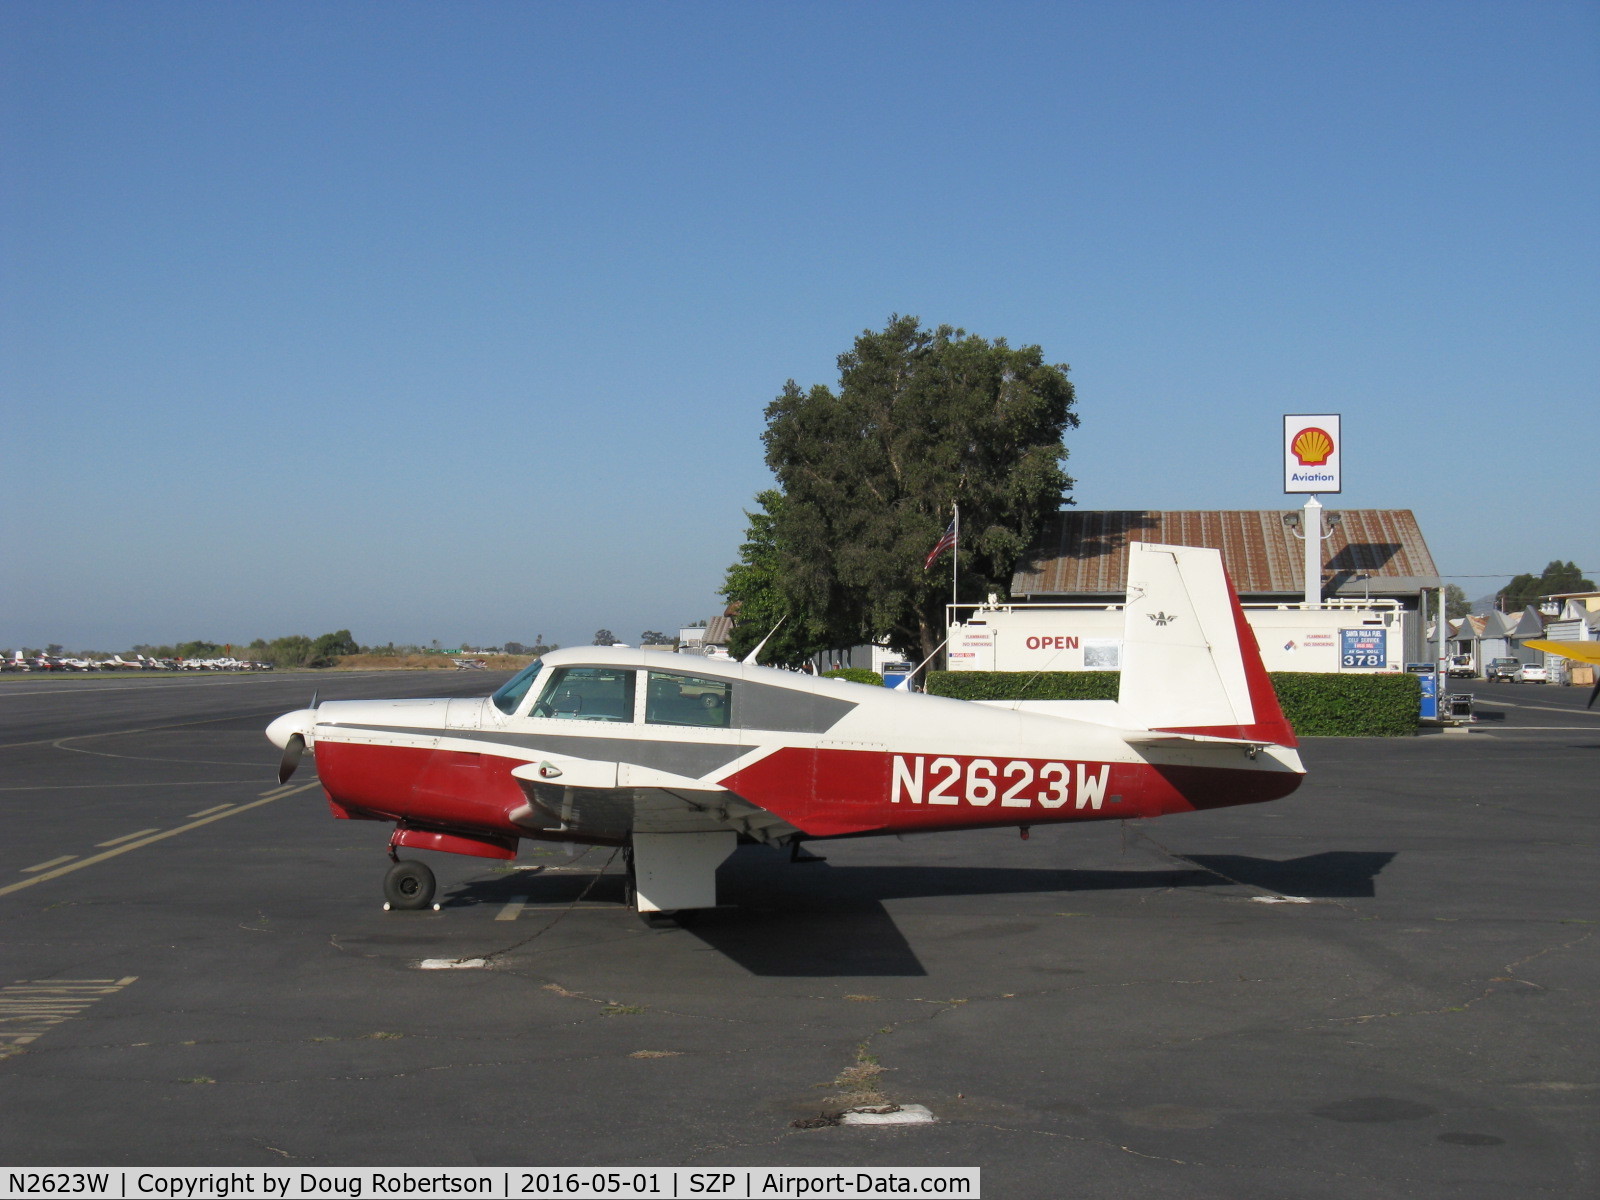 N2623W, 1966 Mooney M20C Mark 21 Ranger C/N 3296, 1966 Mooney M20C MARK 21. Lycoming O-360 180 Hp. My first Mooney flown was a 1964 M20C MARK 21 in 1966.